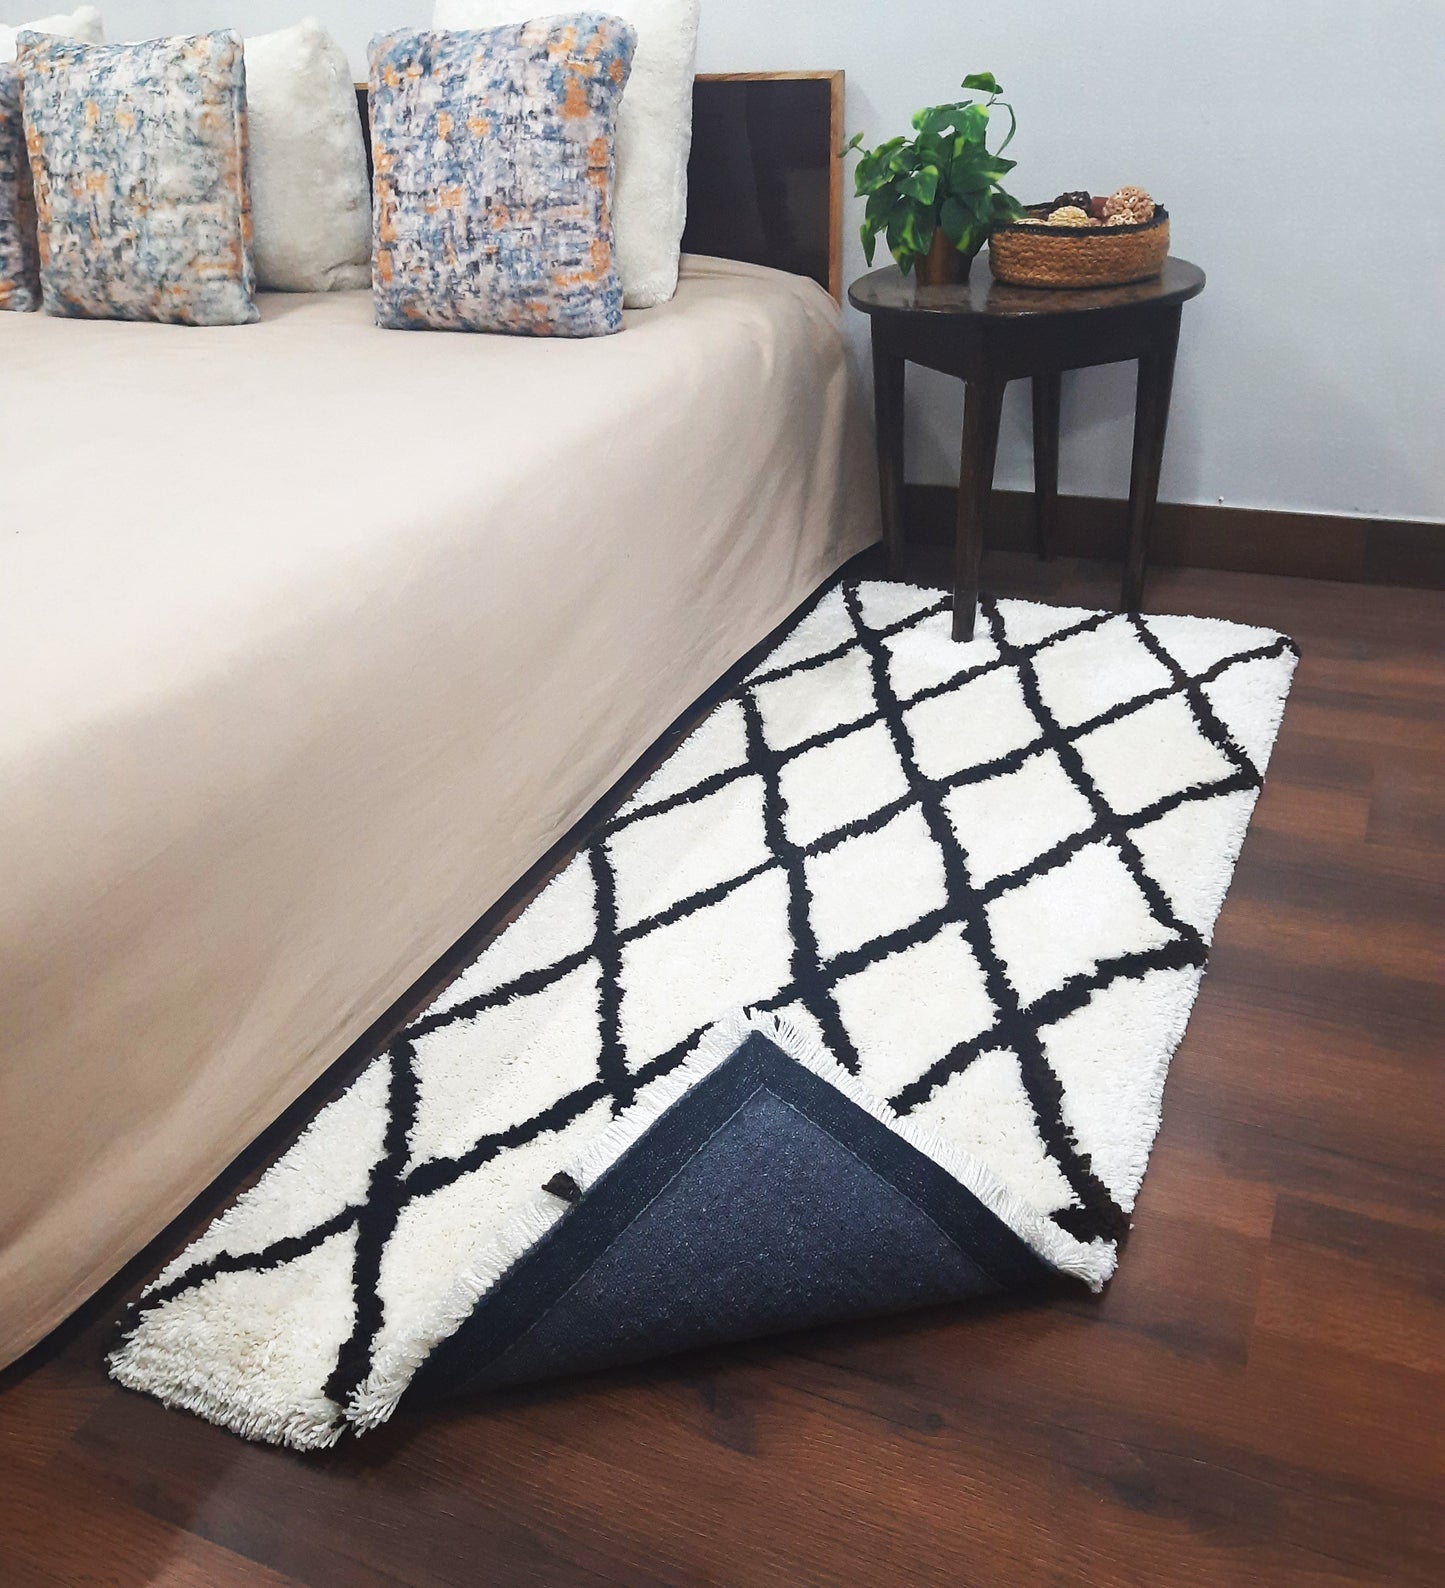 Plush Soft Washable Shaggy White Carpet With Black Check Design /Bedside Runners by Avioni Home